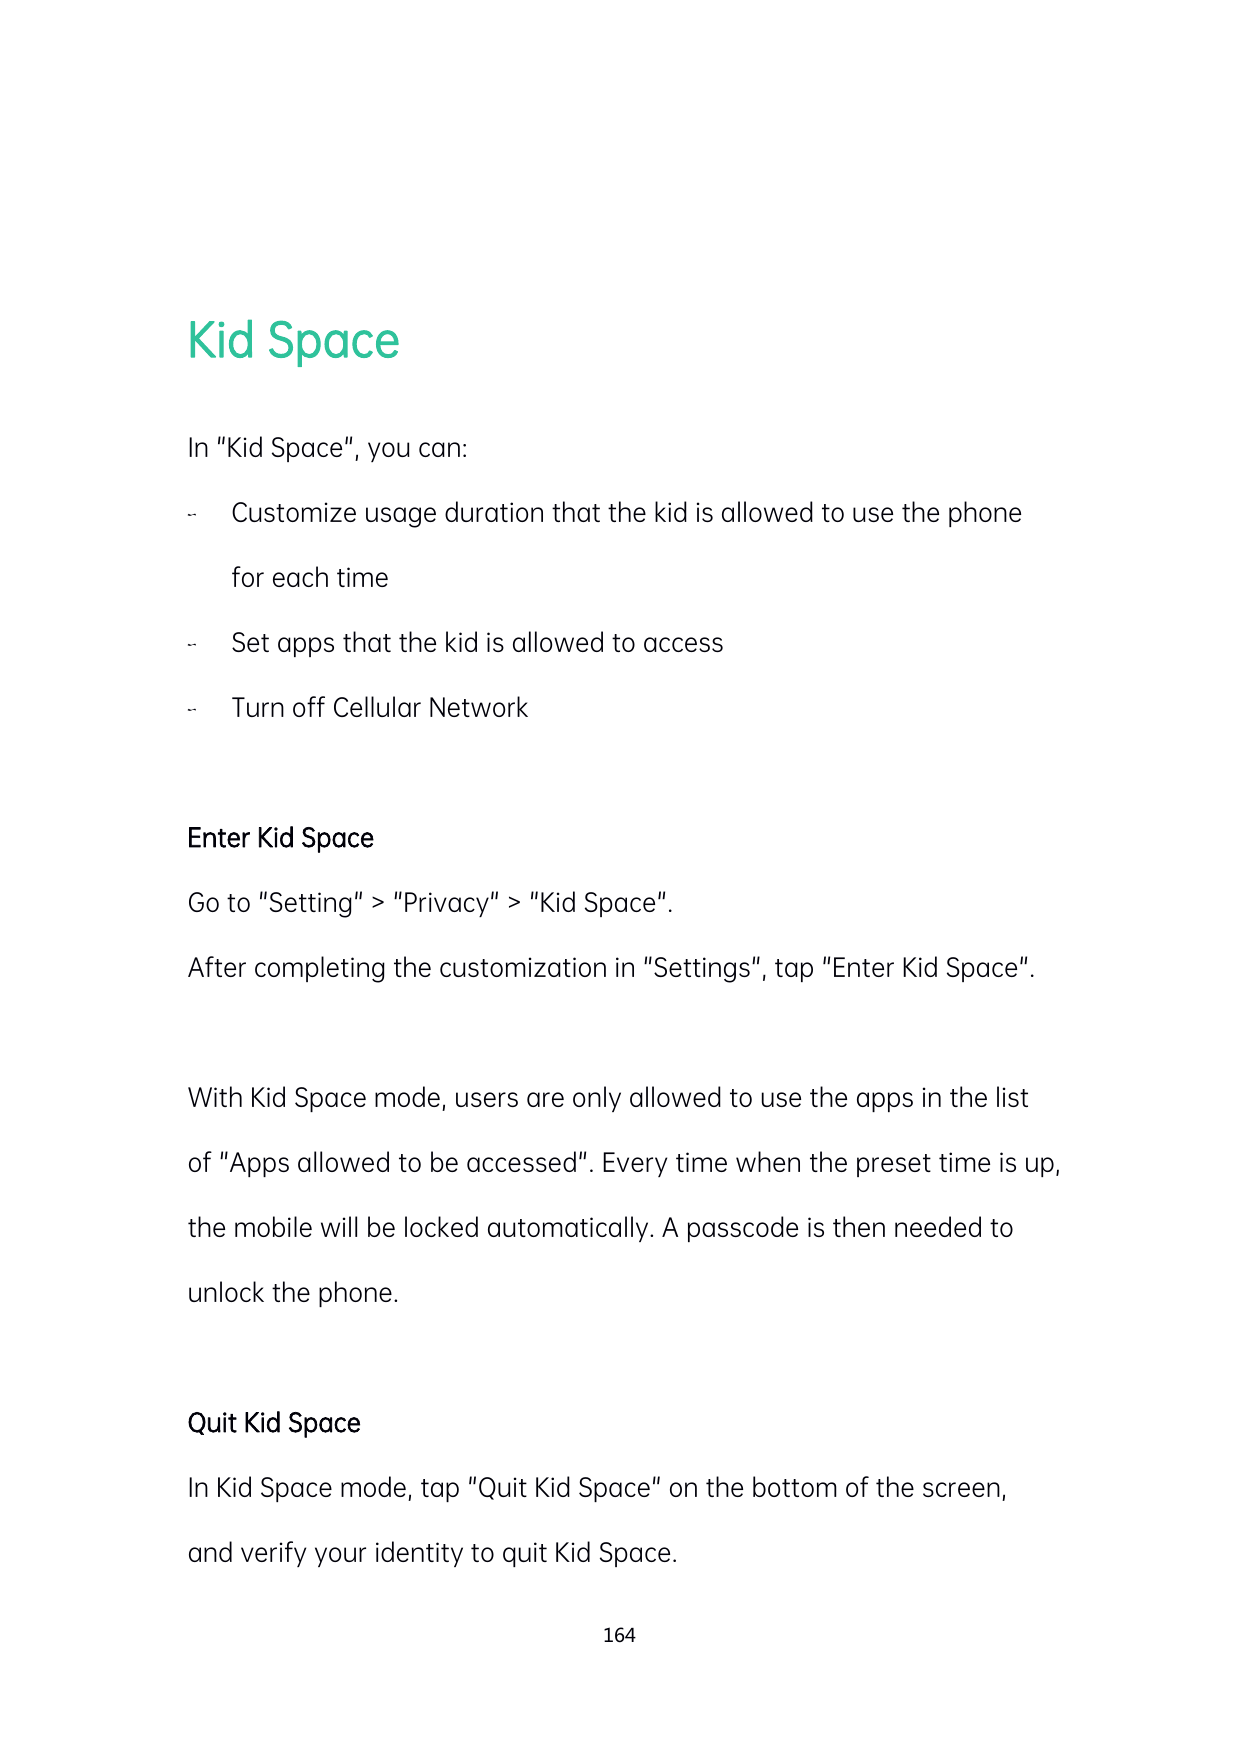 Kid SpaceIn "Kid Space", you can:Customize usage duration that the kid is allowed to use the phonefor each timeSet apps that t